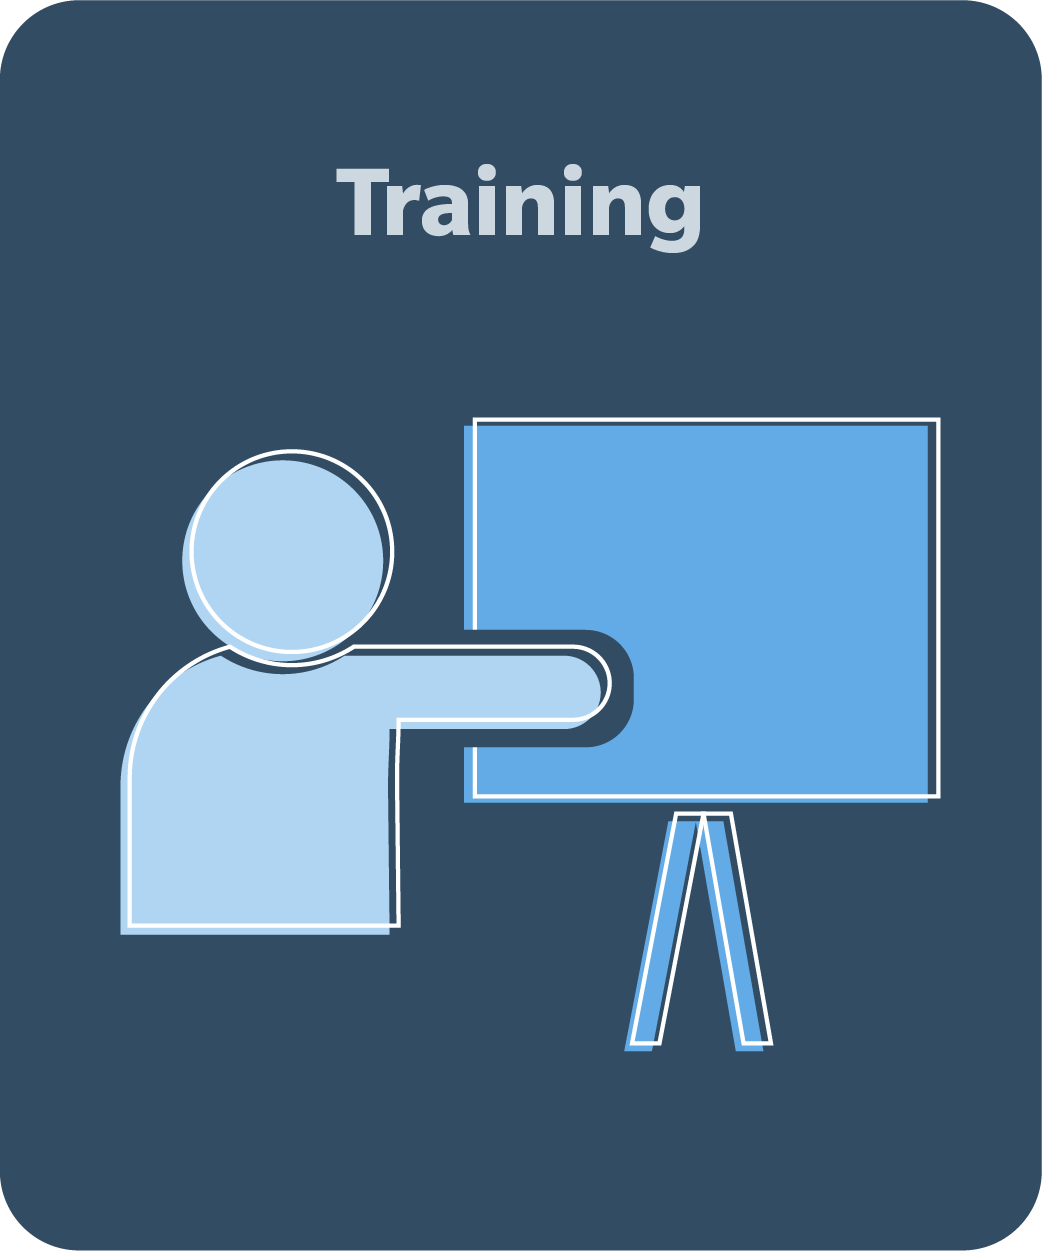 Training with an illustration of a person pointing to a board